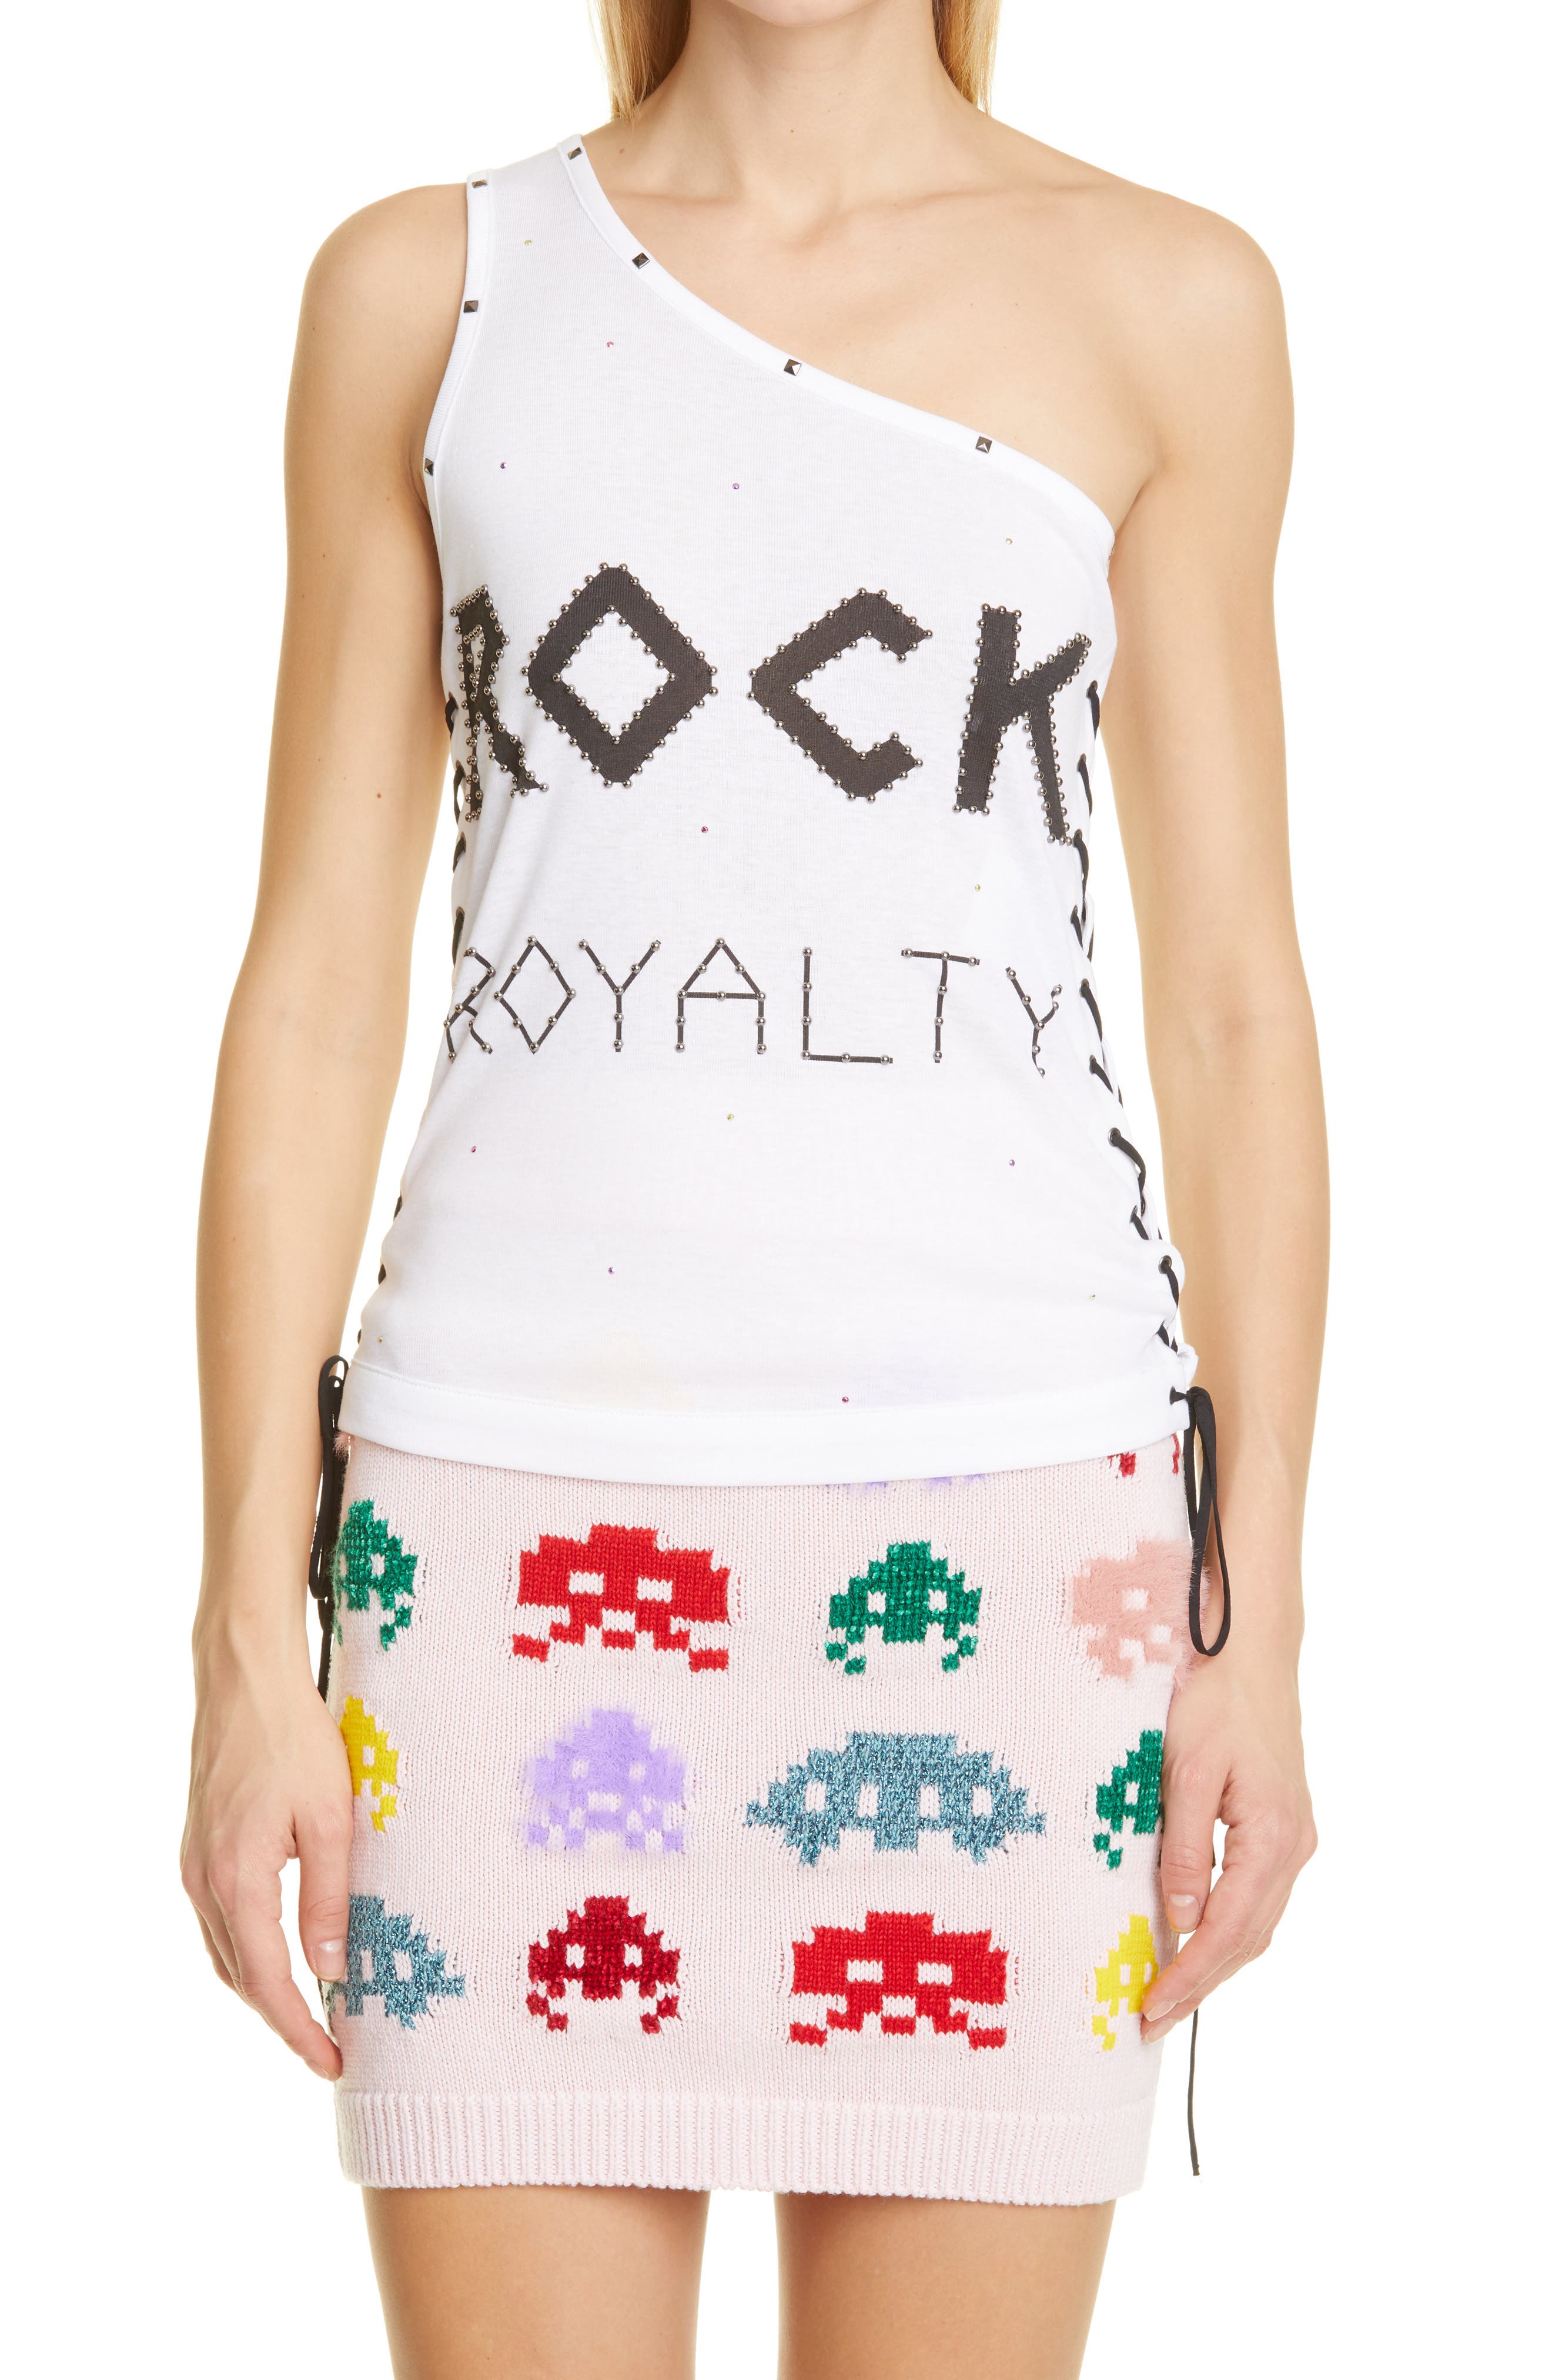 Stella McCartney Rock Royalty One-Shoulder Graphic Tee in Pure White at Nordstrom